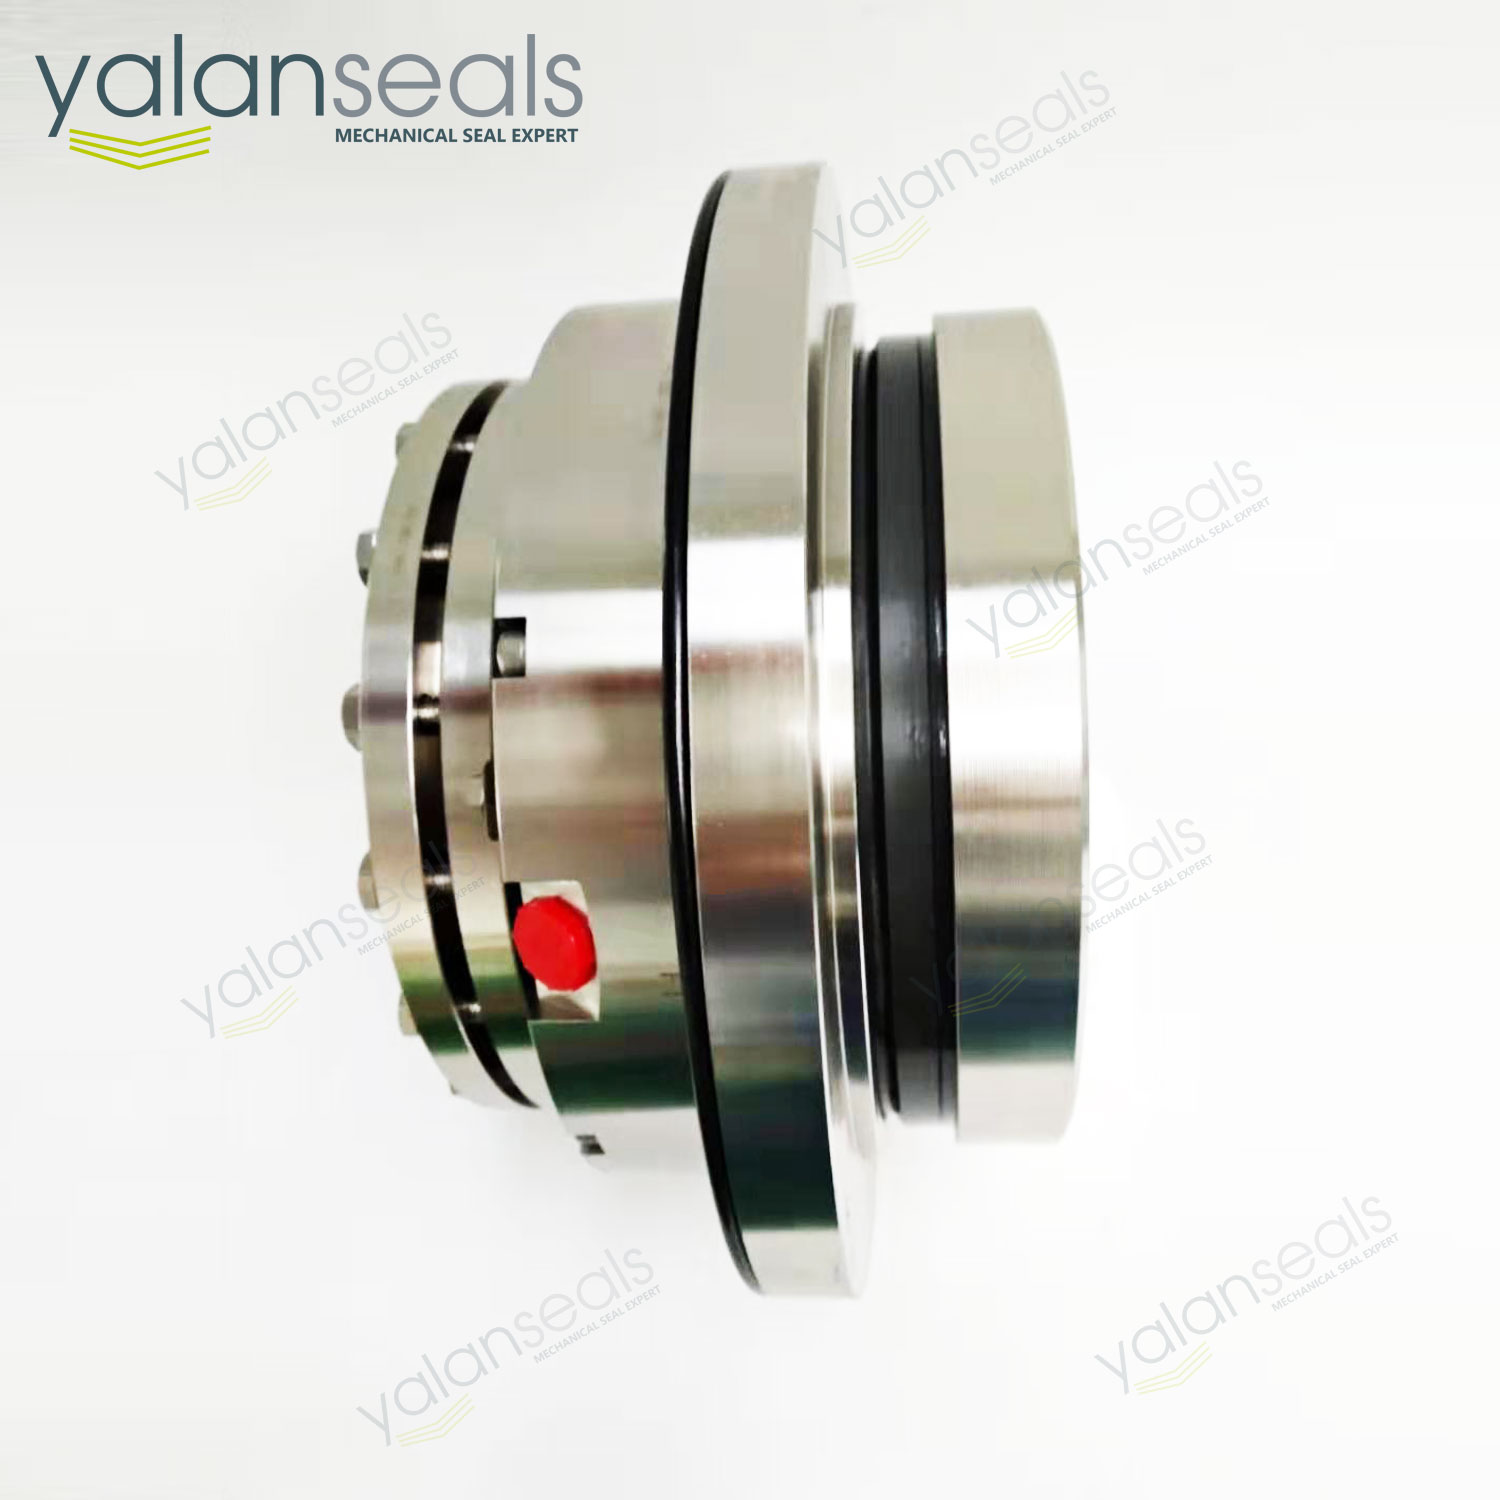 YALAN TL3-S1 Single Cartridge Mechanical Seal for Slurry Pumps and Pulp Pumps